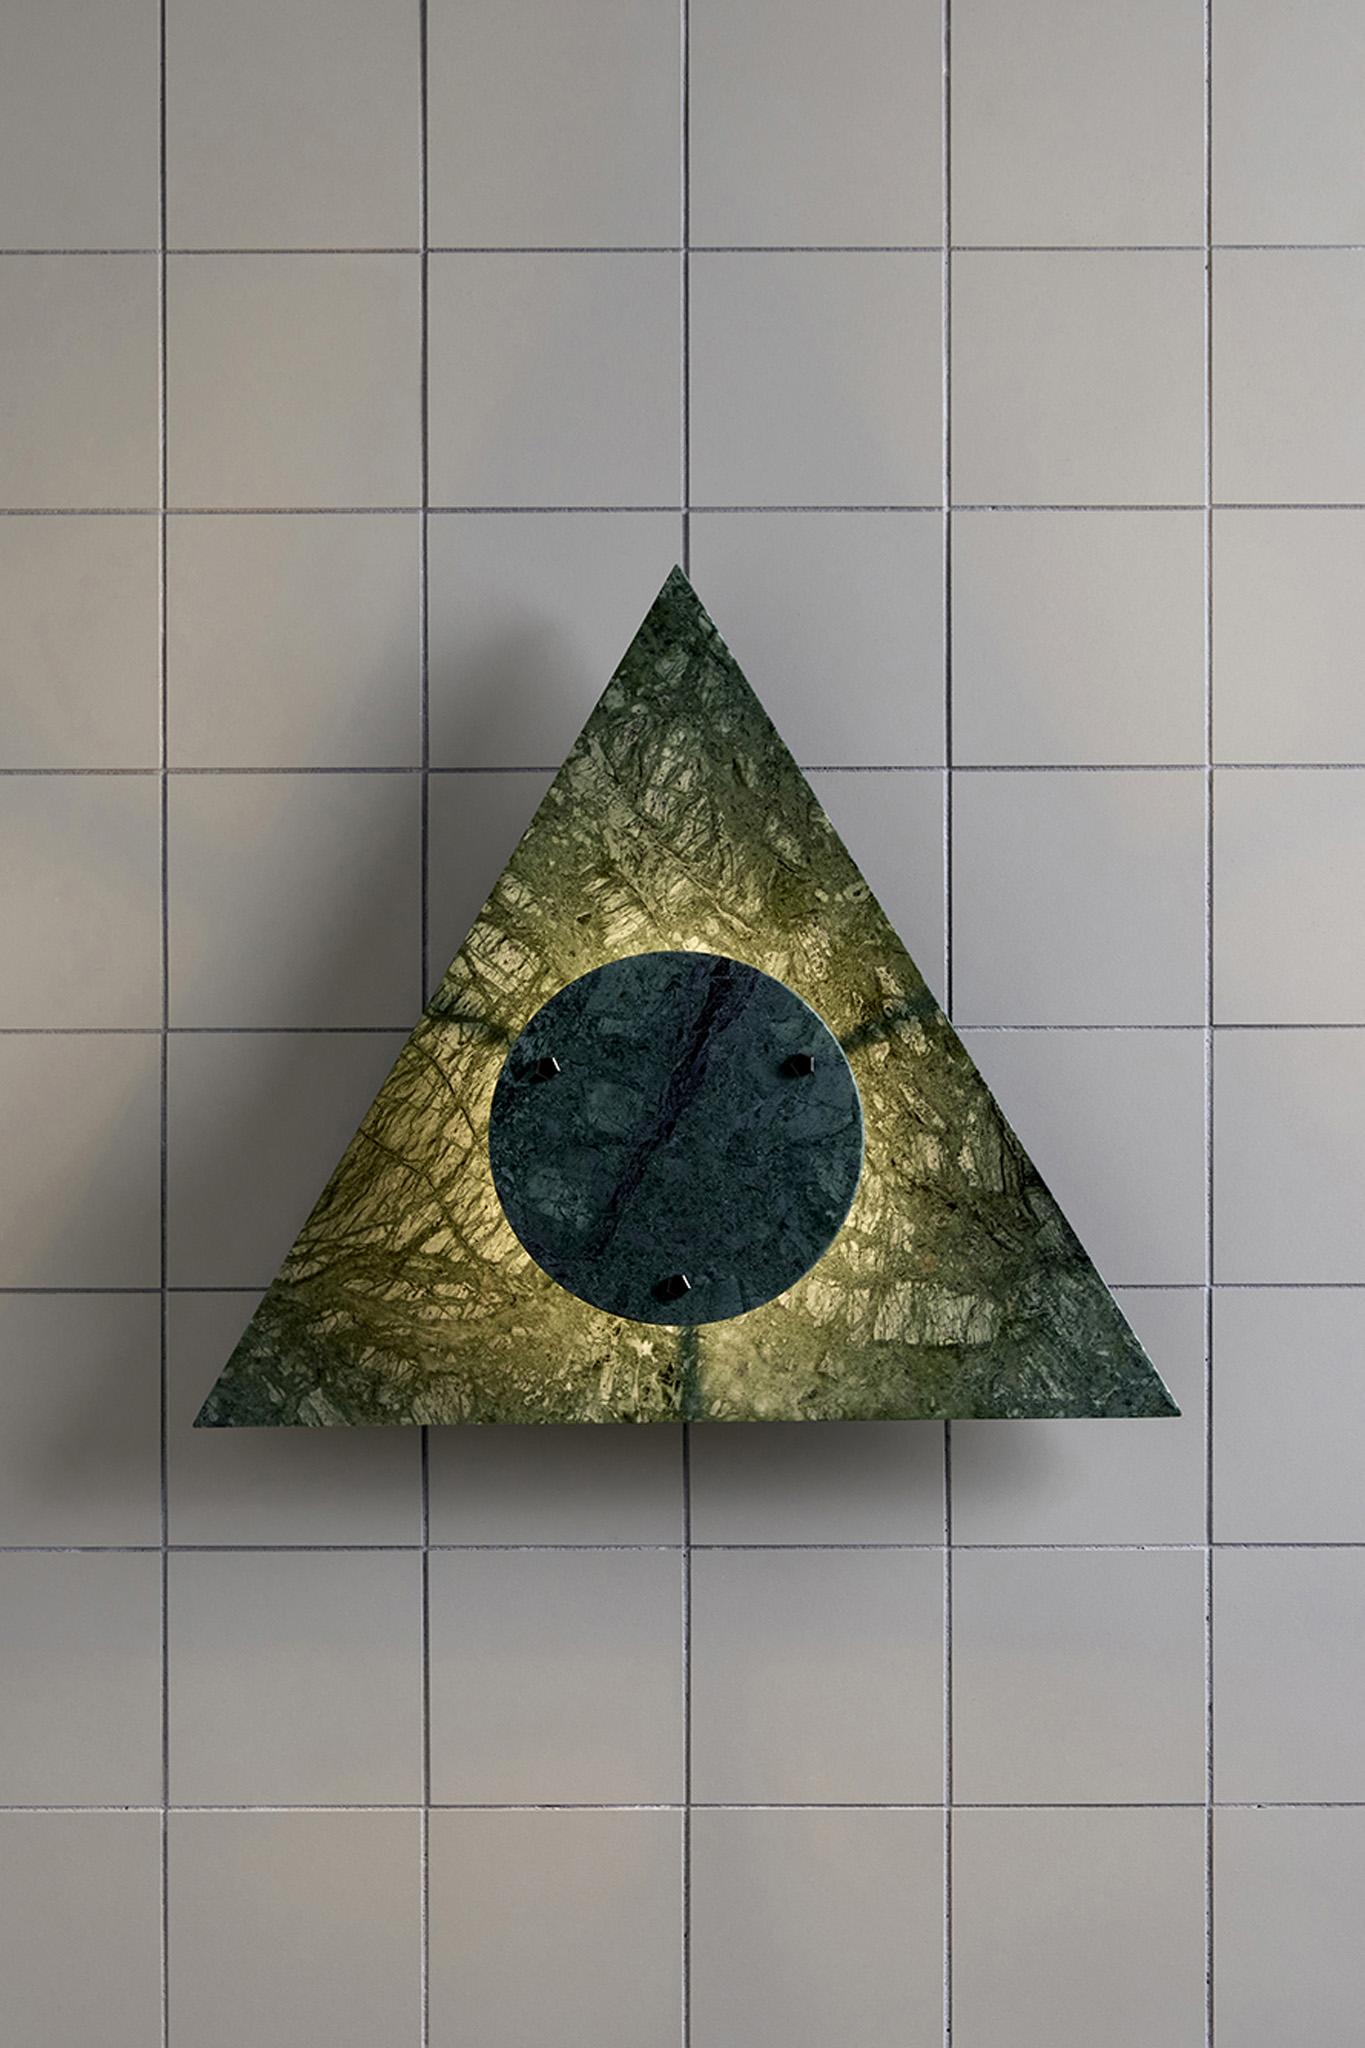 The Bermuda Wall Light range is a contemporary feature lighting design available in three earthy marble hues – Moss, Plum and White Carrara. The equilateral form allows the wall light to be infinitely tessellated to create an impressive centrepiece